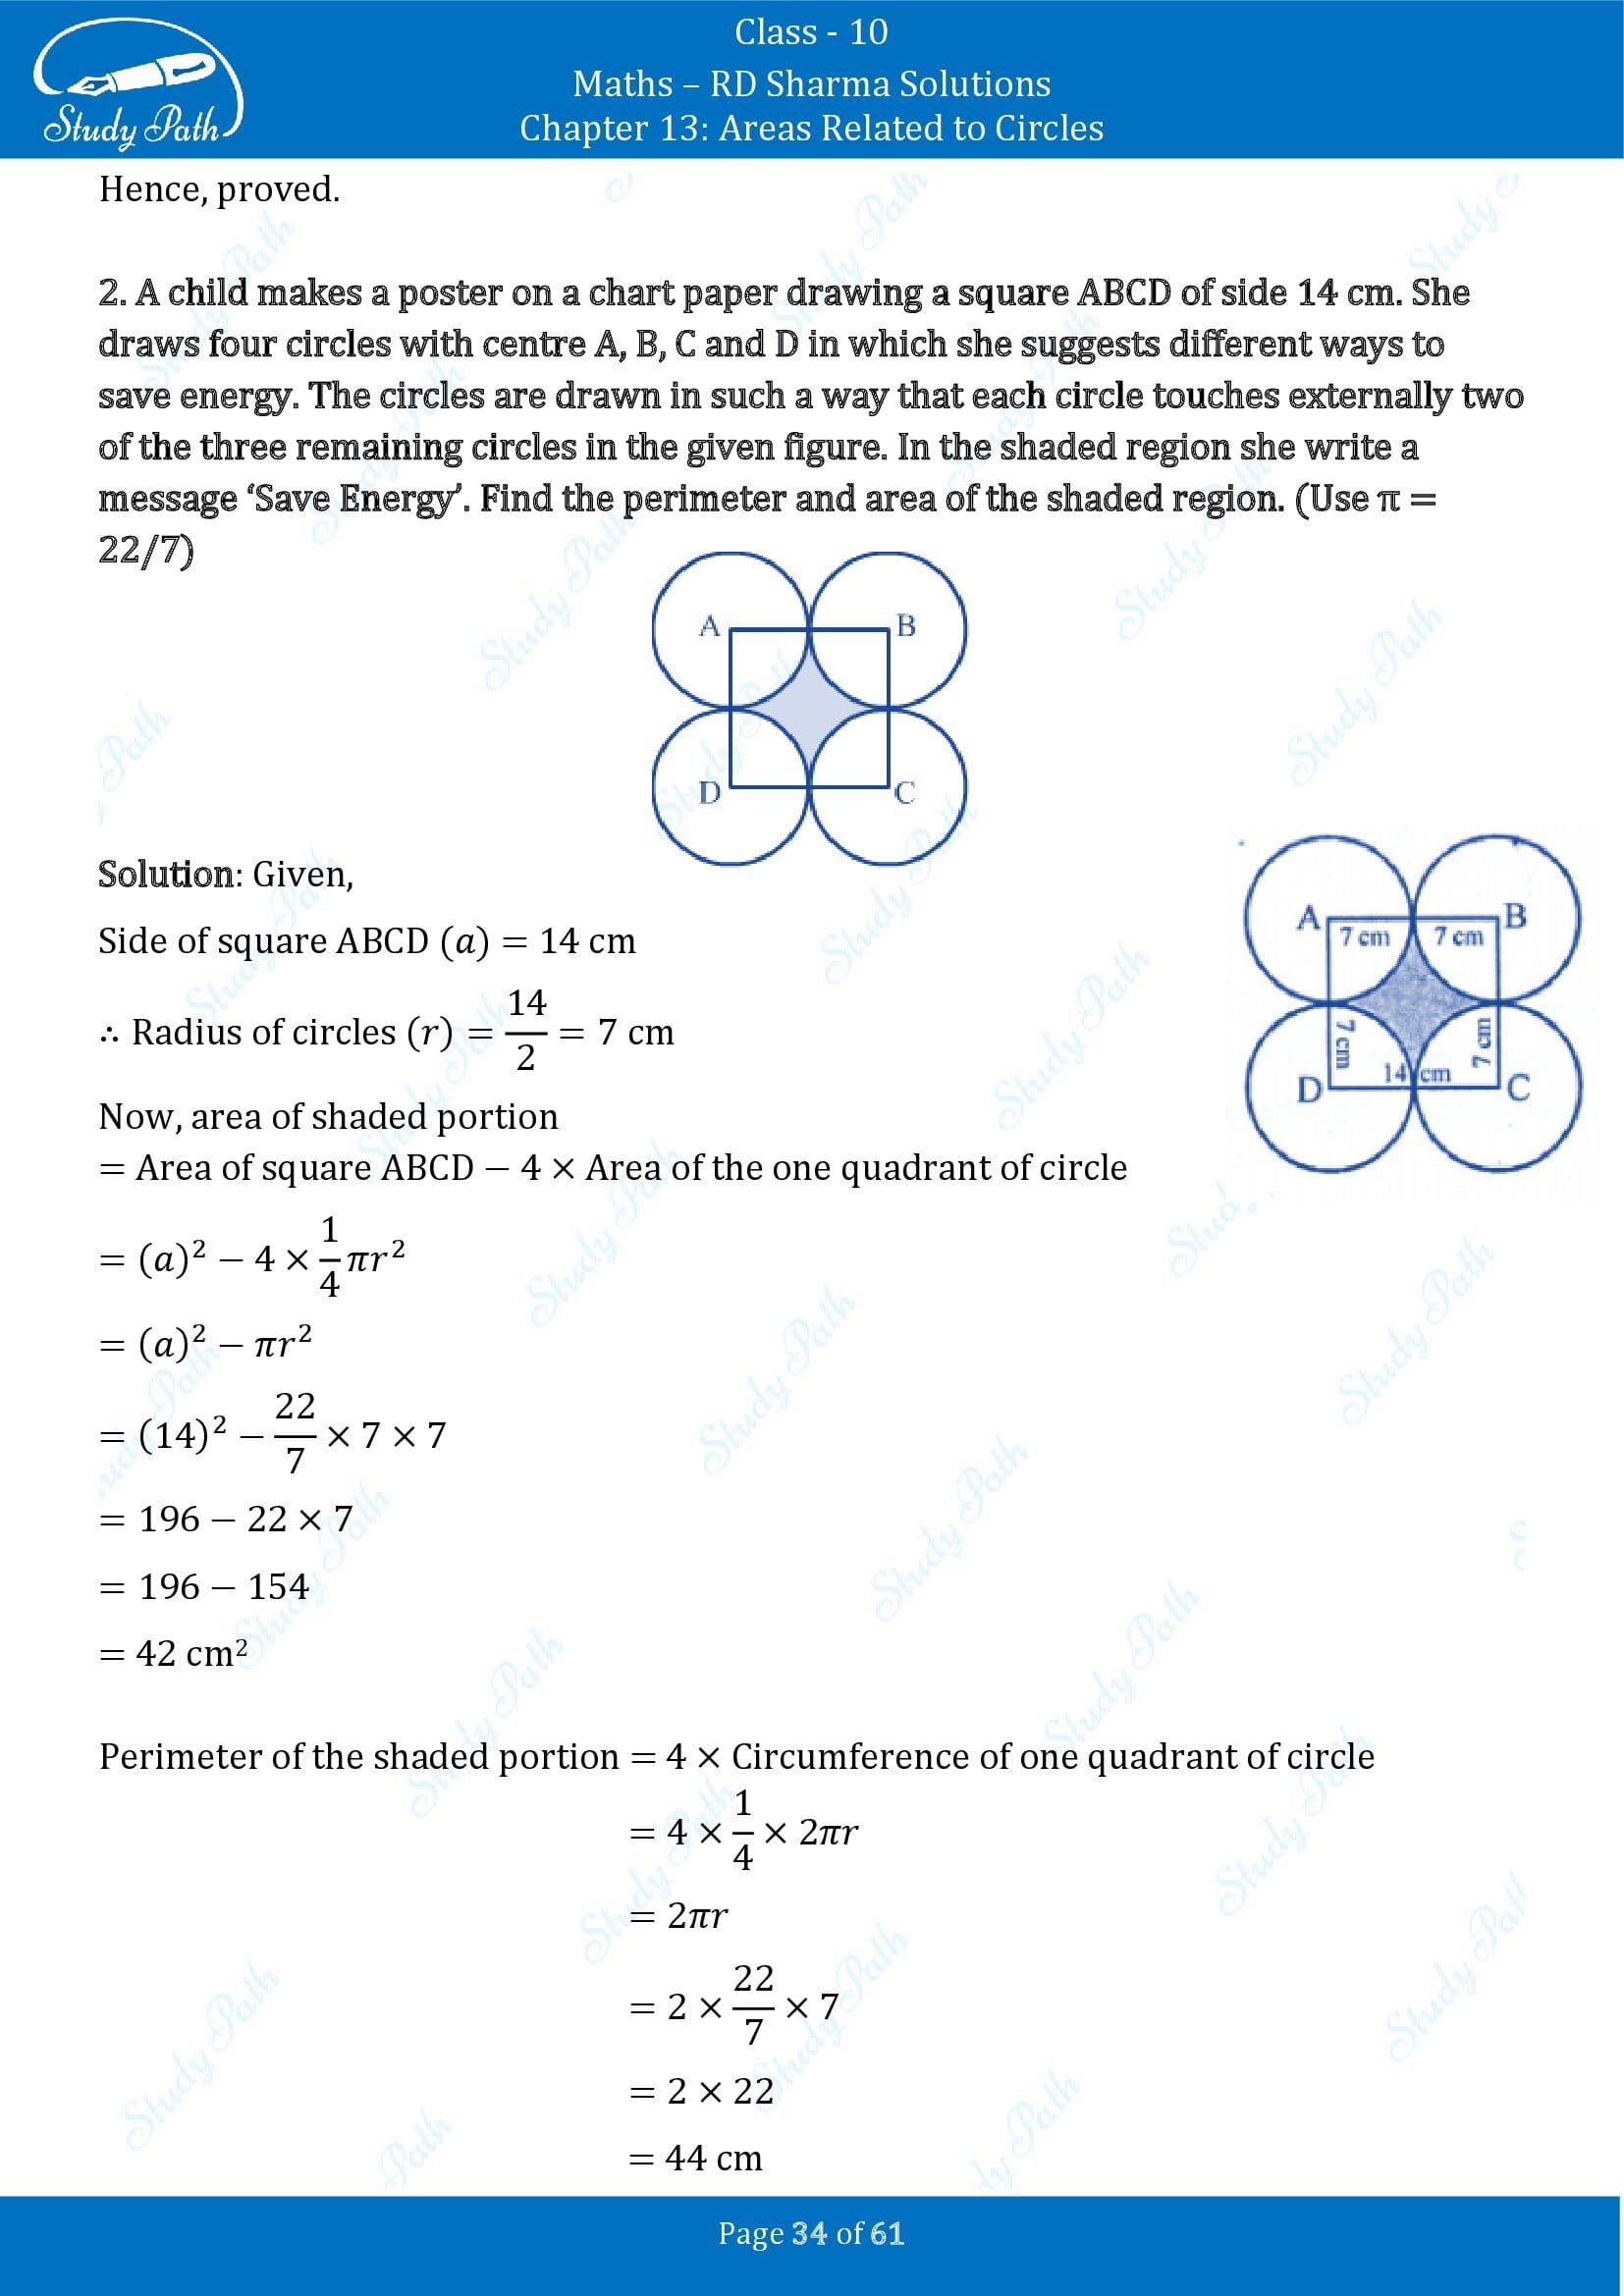 RD Sharma Solutions Class 10 Chapter 13 Areas Related to Circles Exercise 13.4 00034